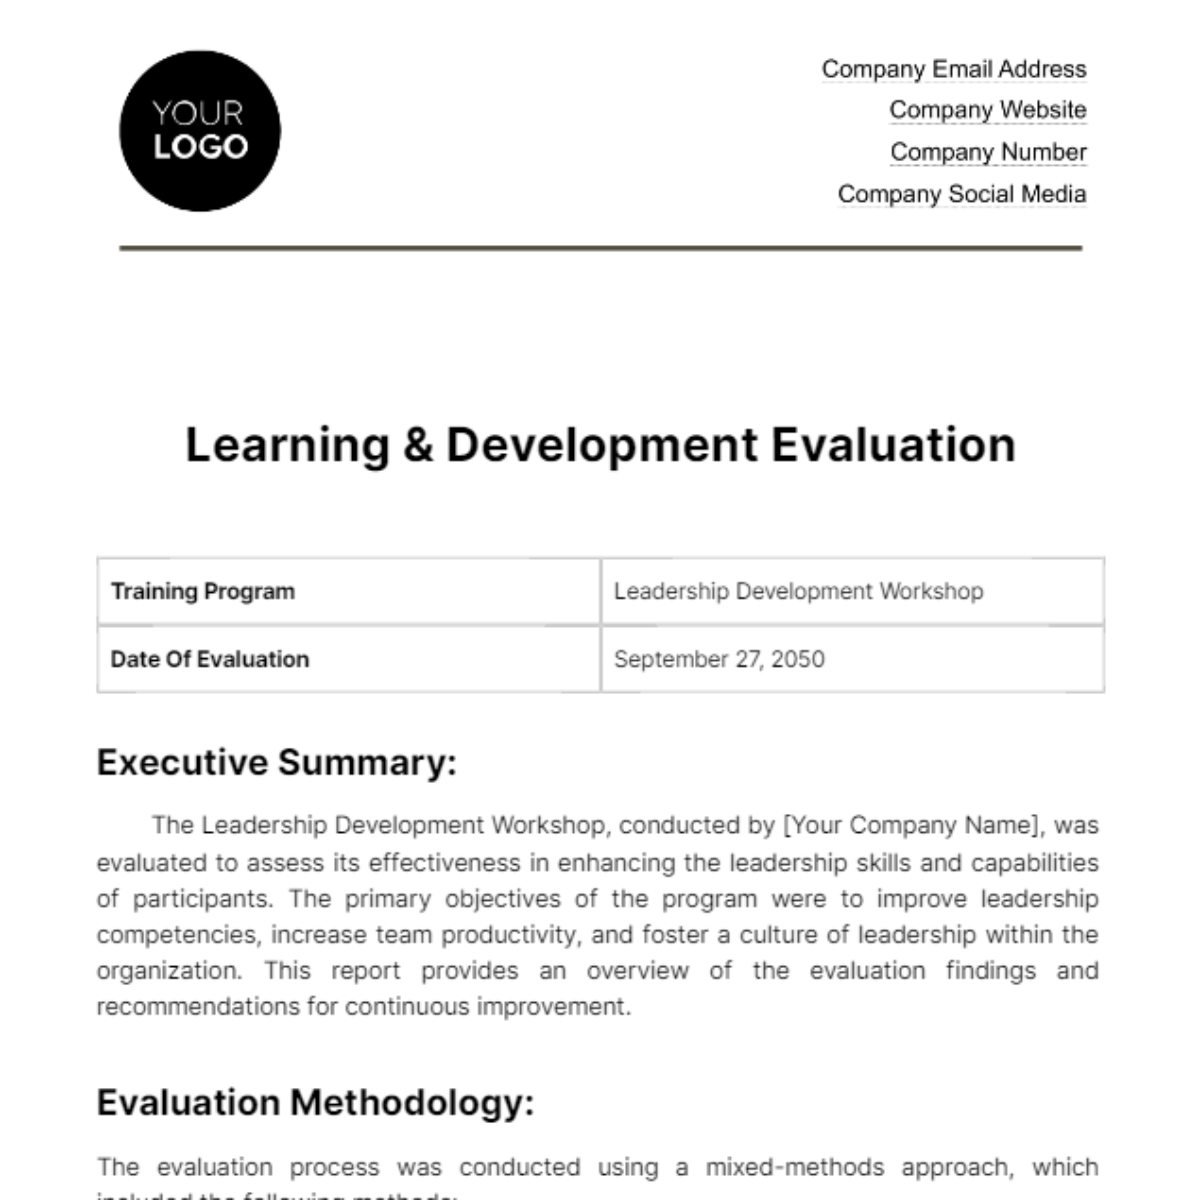 Free Learning & Development Evaluation HR Template